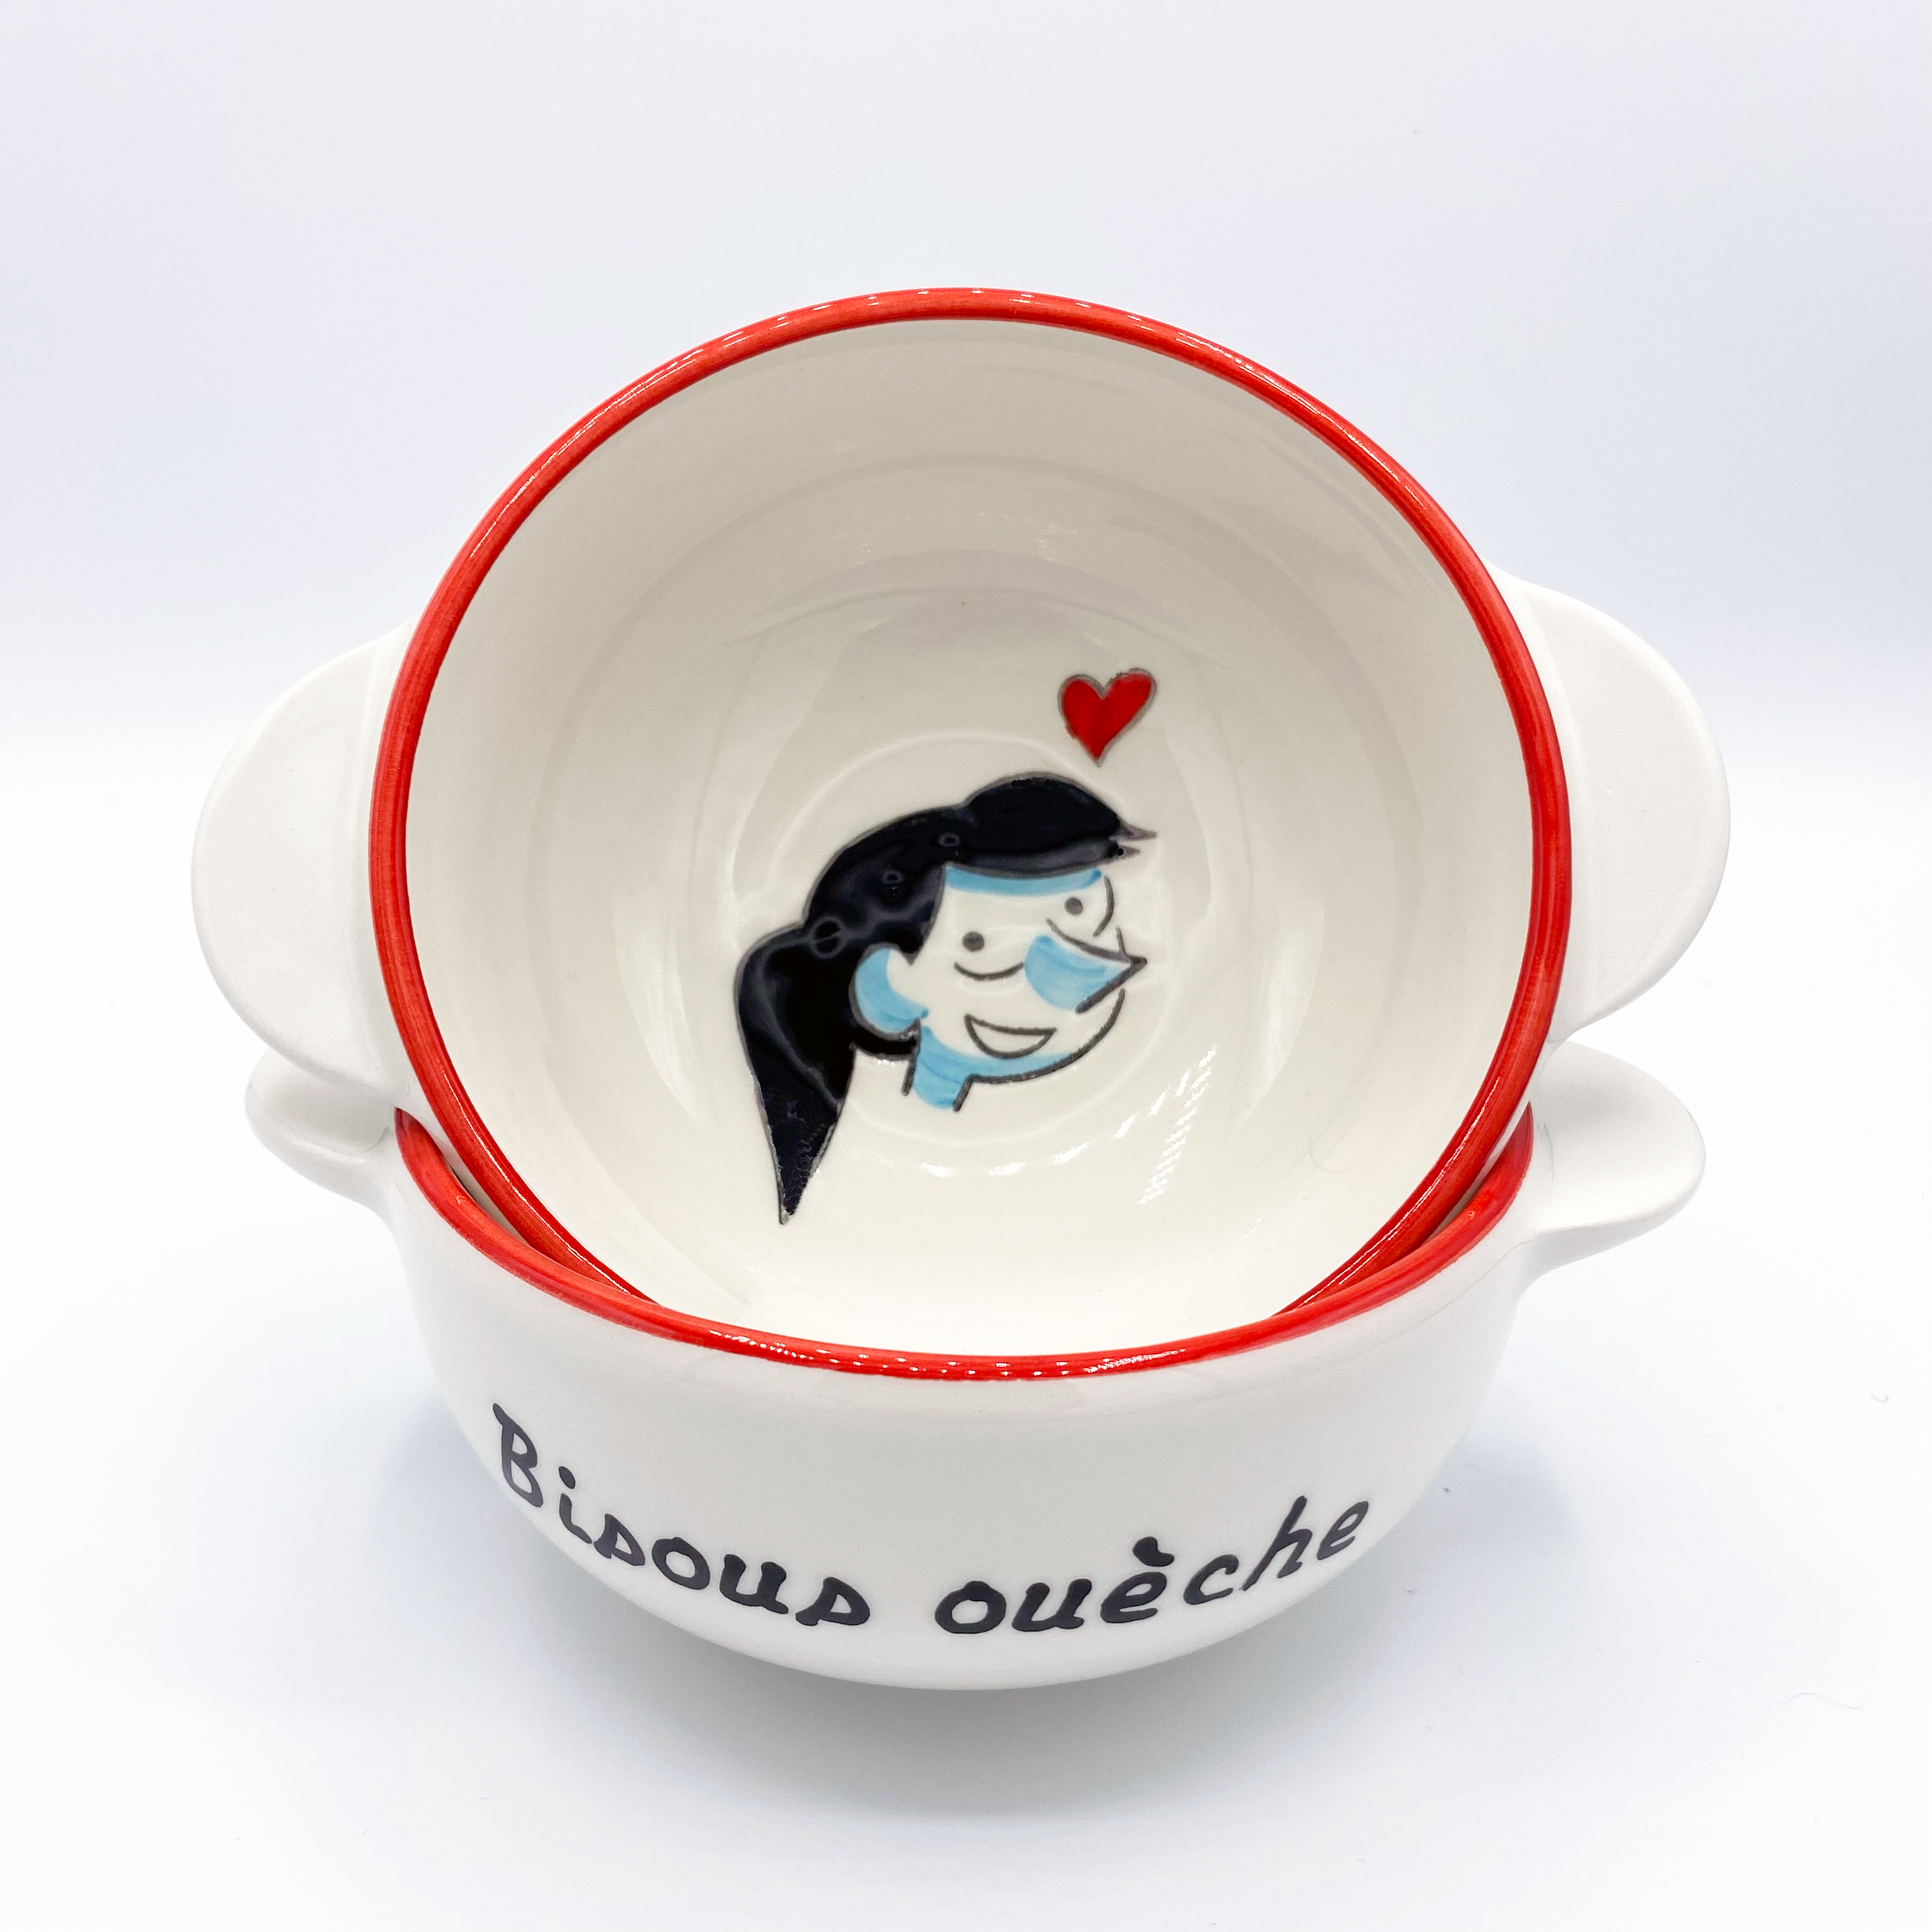 <font color="red">New!</font><br> Collector stylish bowl  <br> "Bisous ouèche"